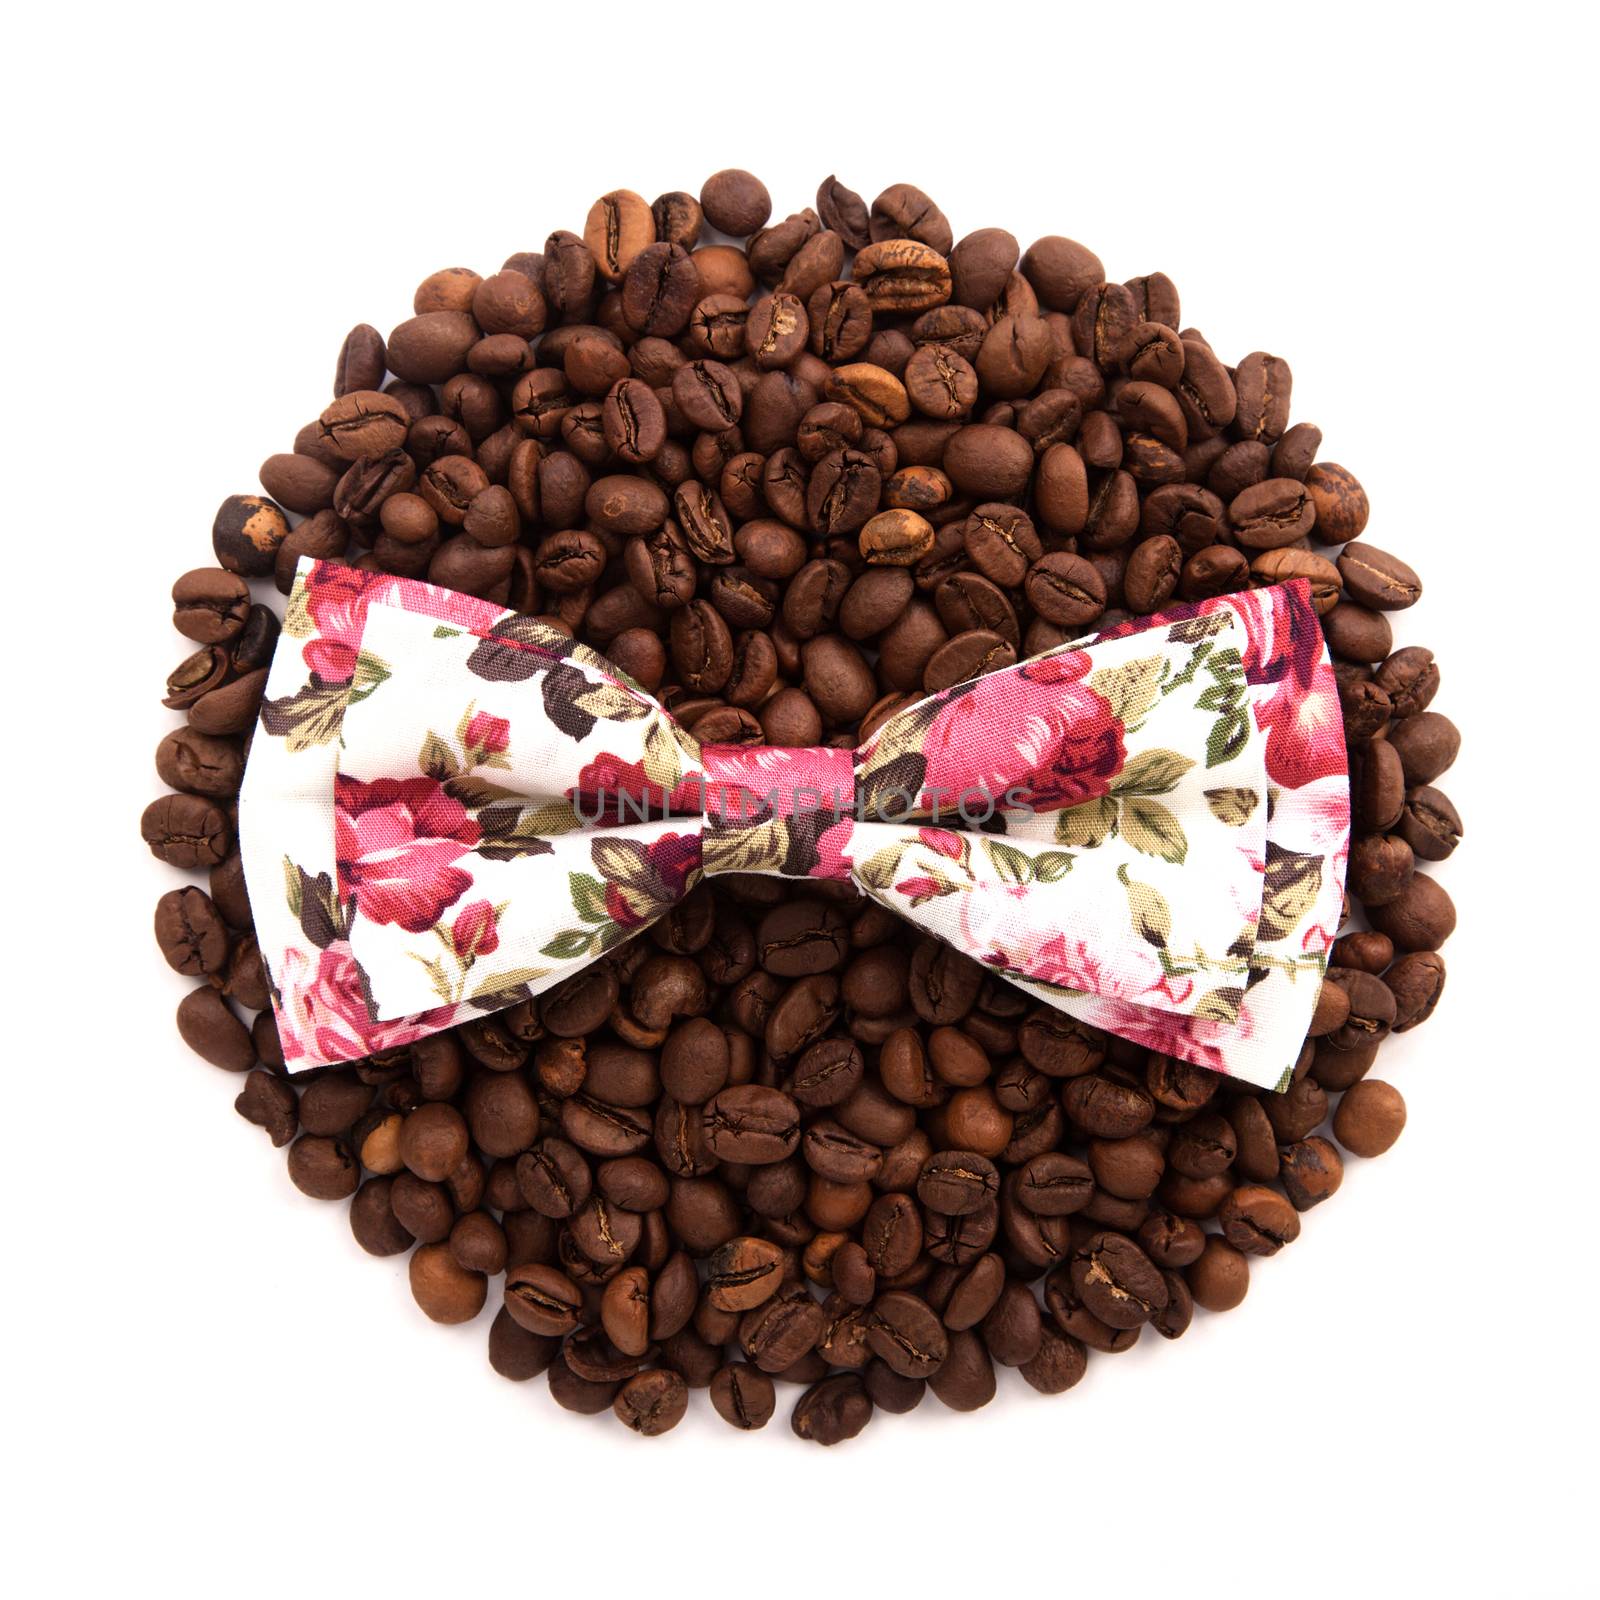 flower colors bow tie lie on the circle of coffee beans isolated on white background